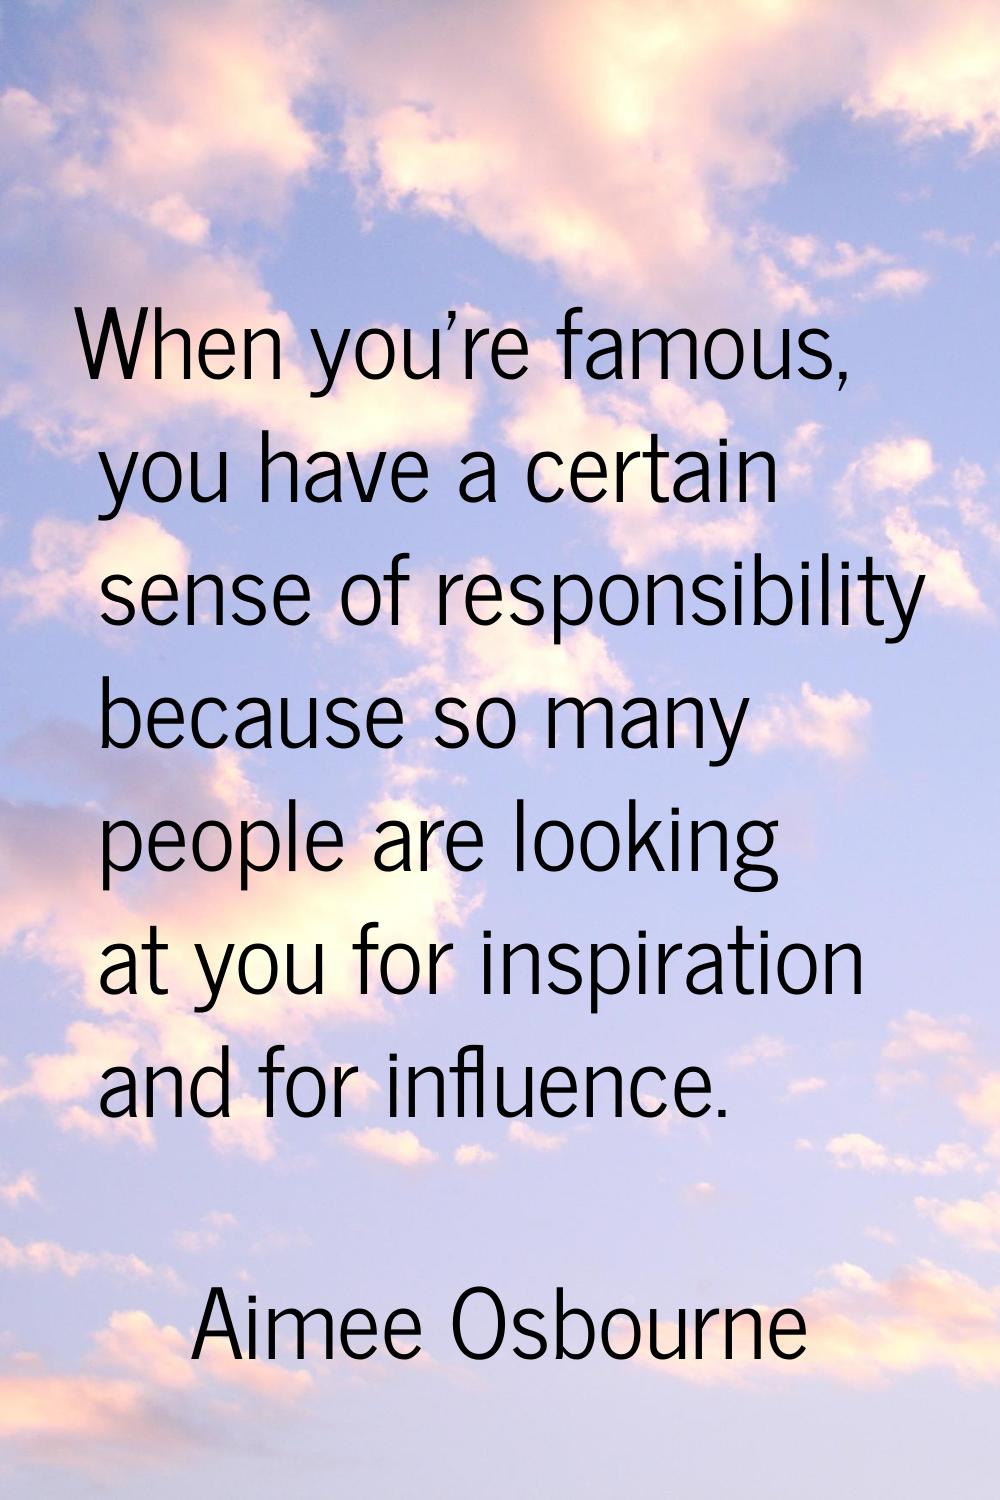 When you're famous, you have a certain sense of responsibility because so many people are looking a